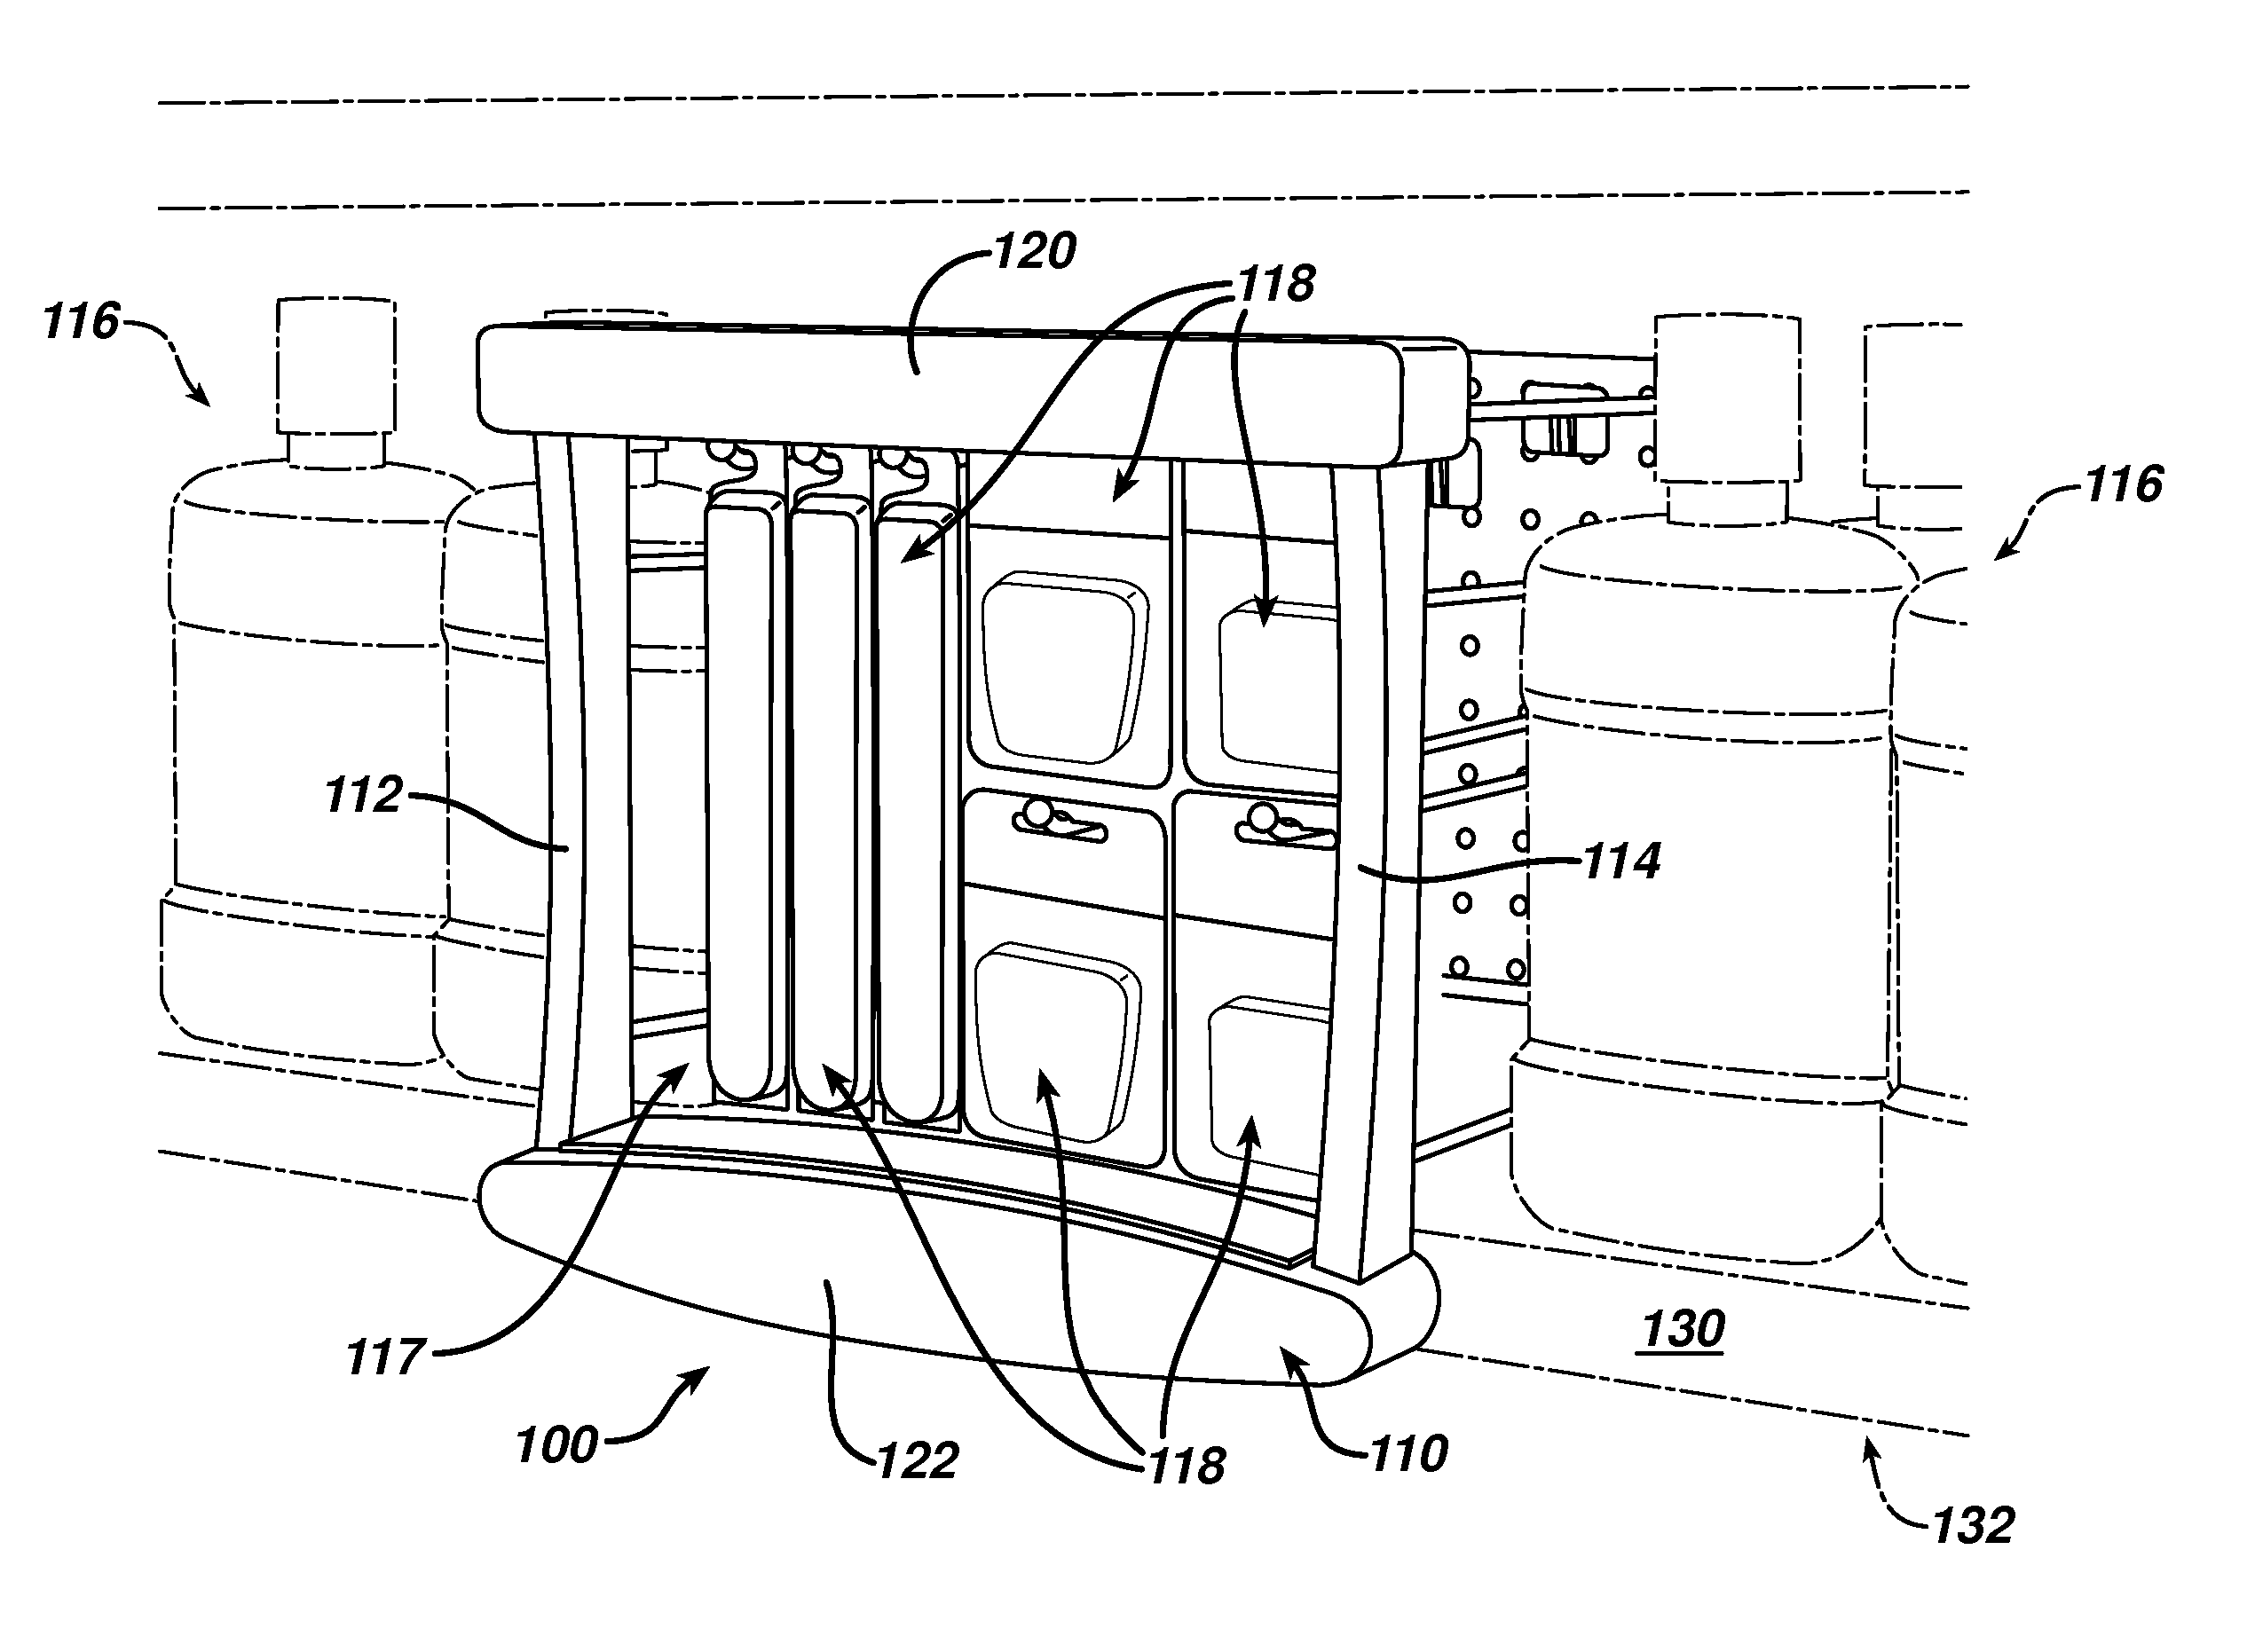 Method and apparatus for displaying and selling products